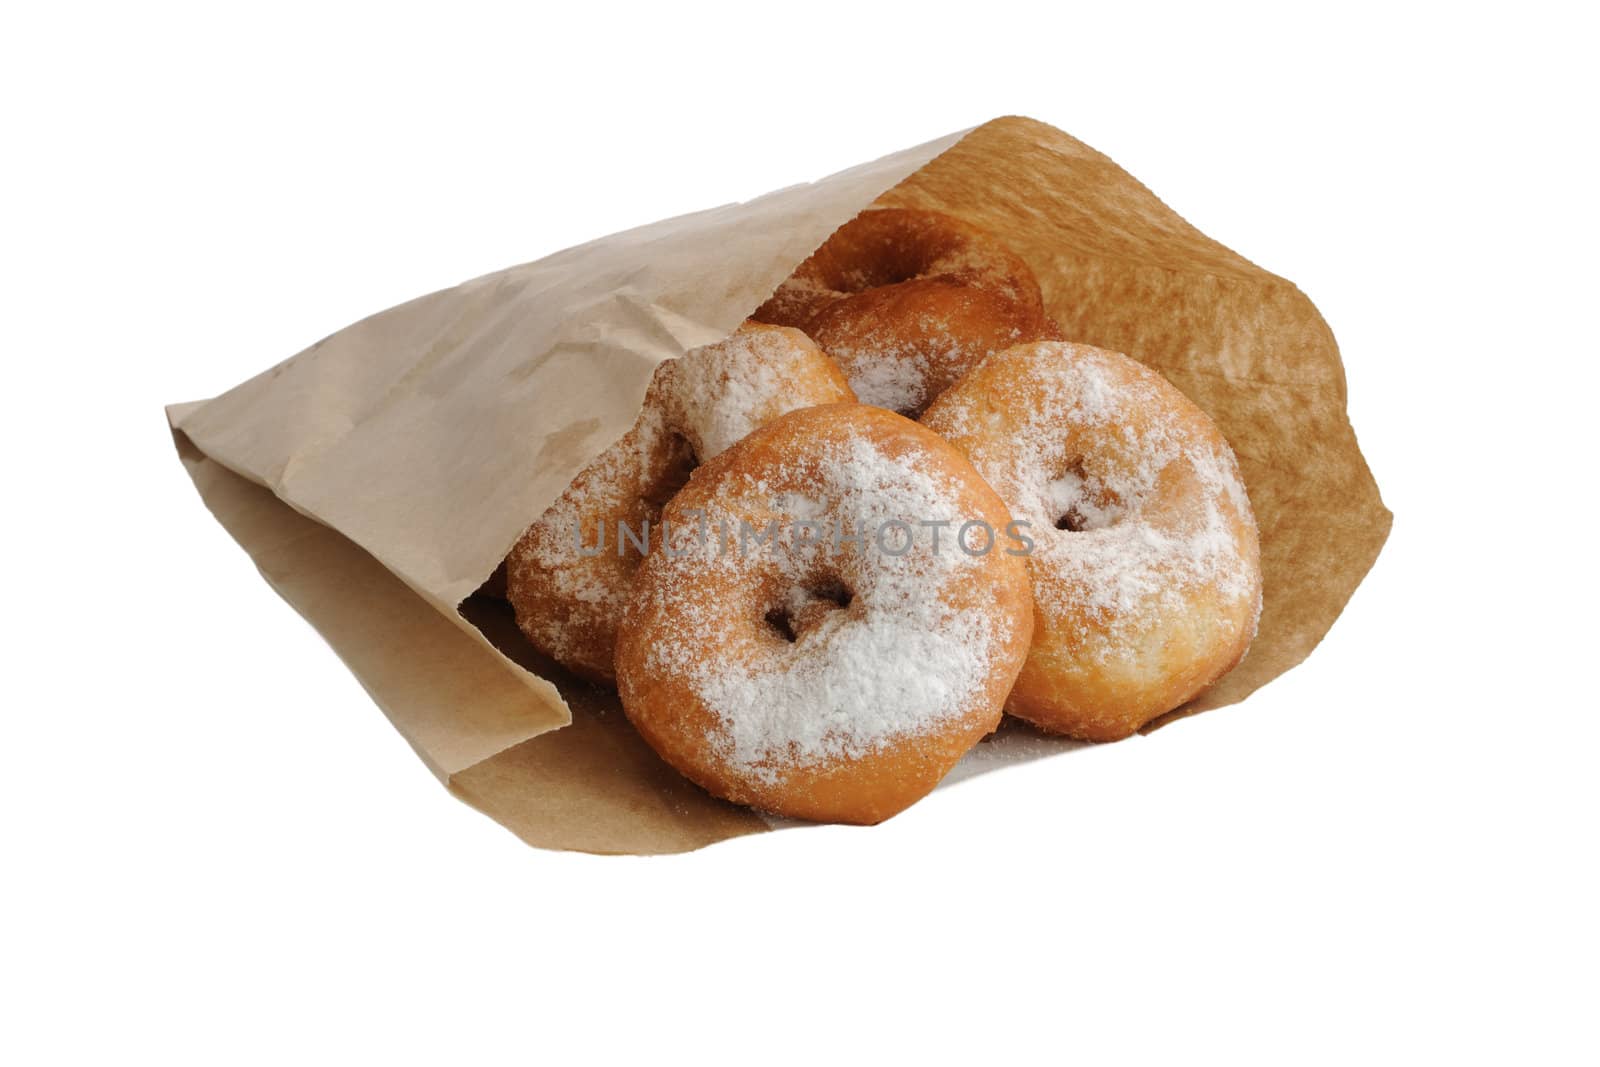 Fried donuts in a paper bag by Apolonia